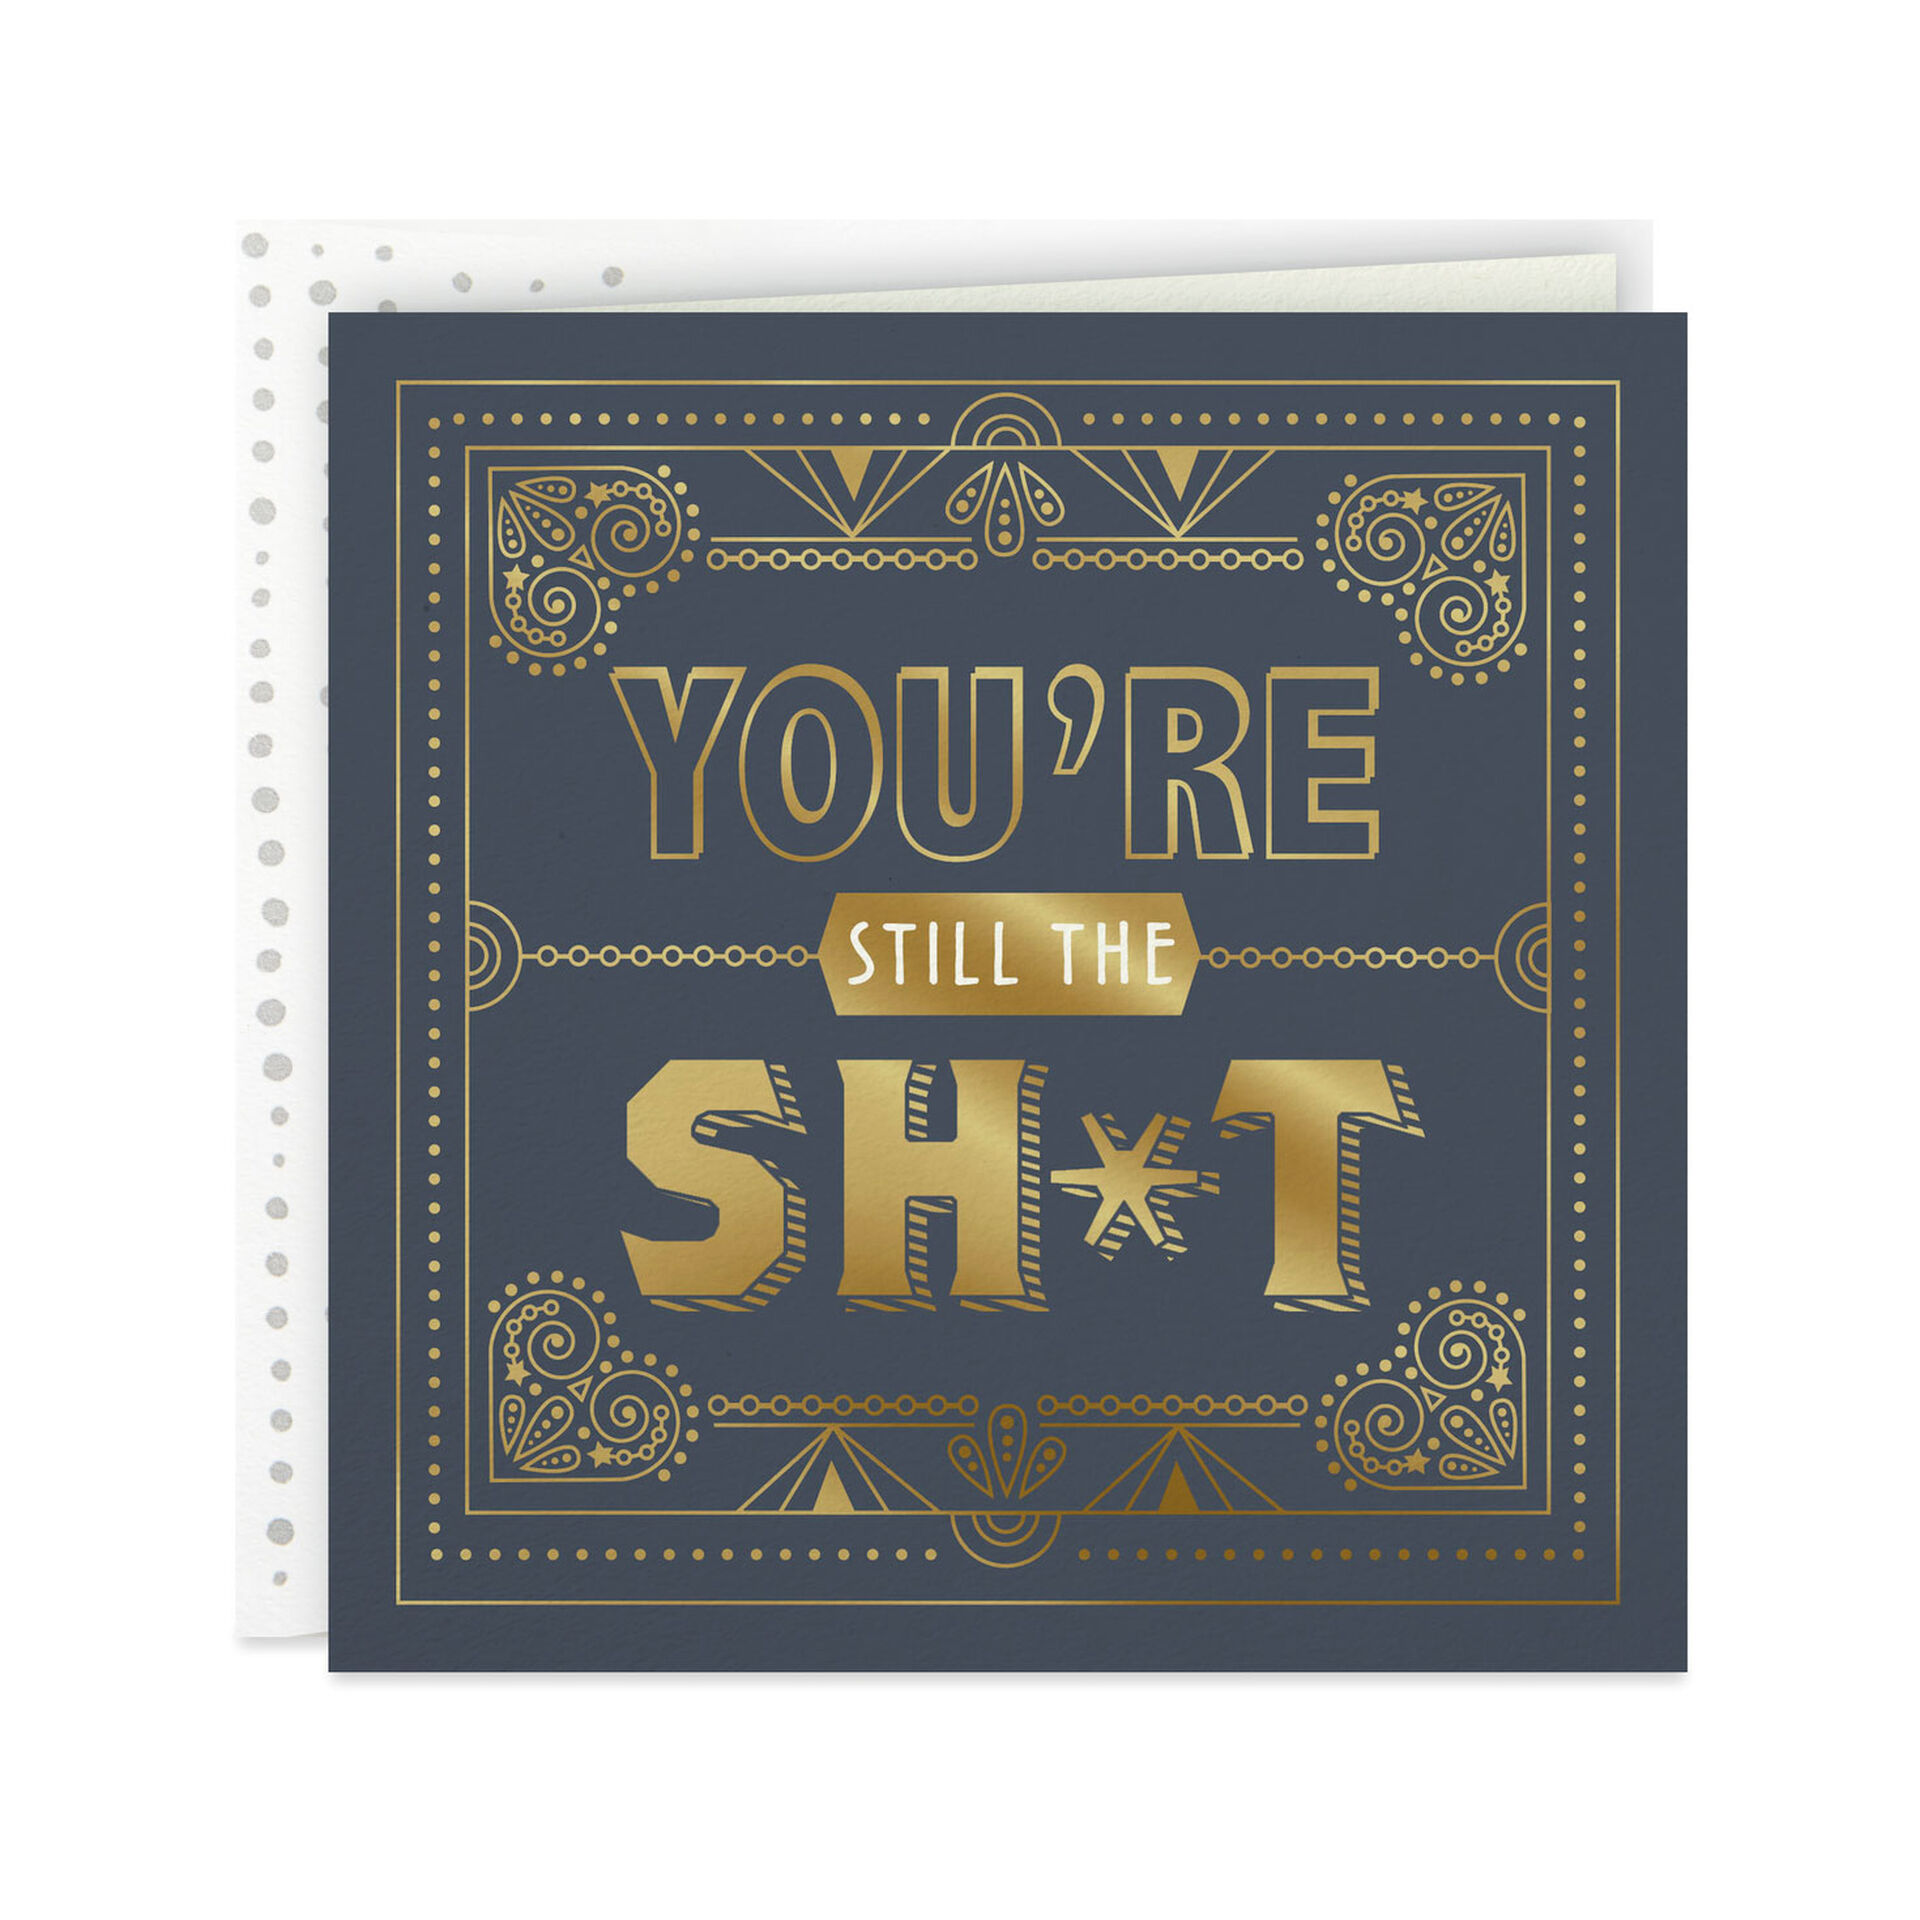 Youre-Still-the-Sht-Birthday-Card_359YYB1274_01